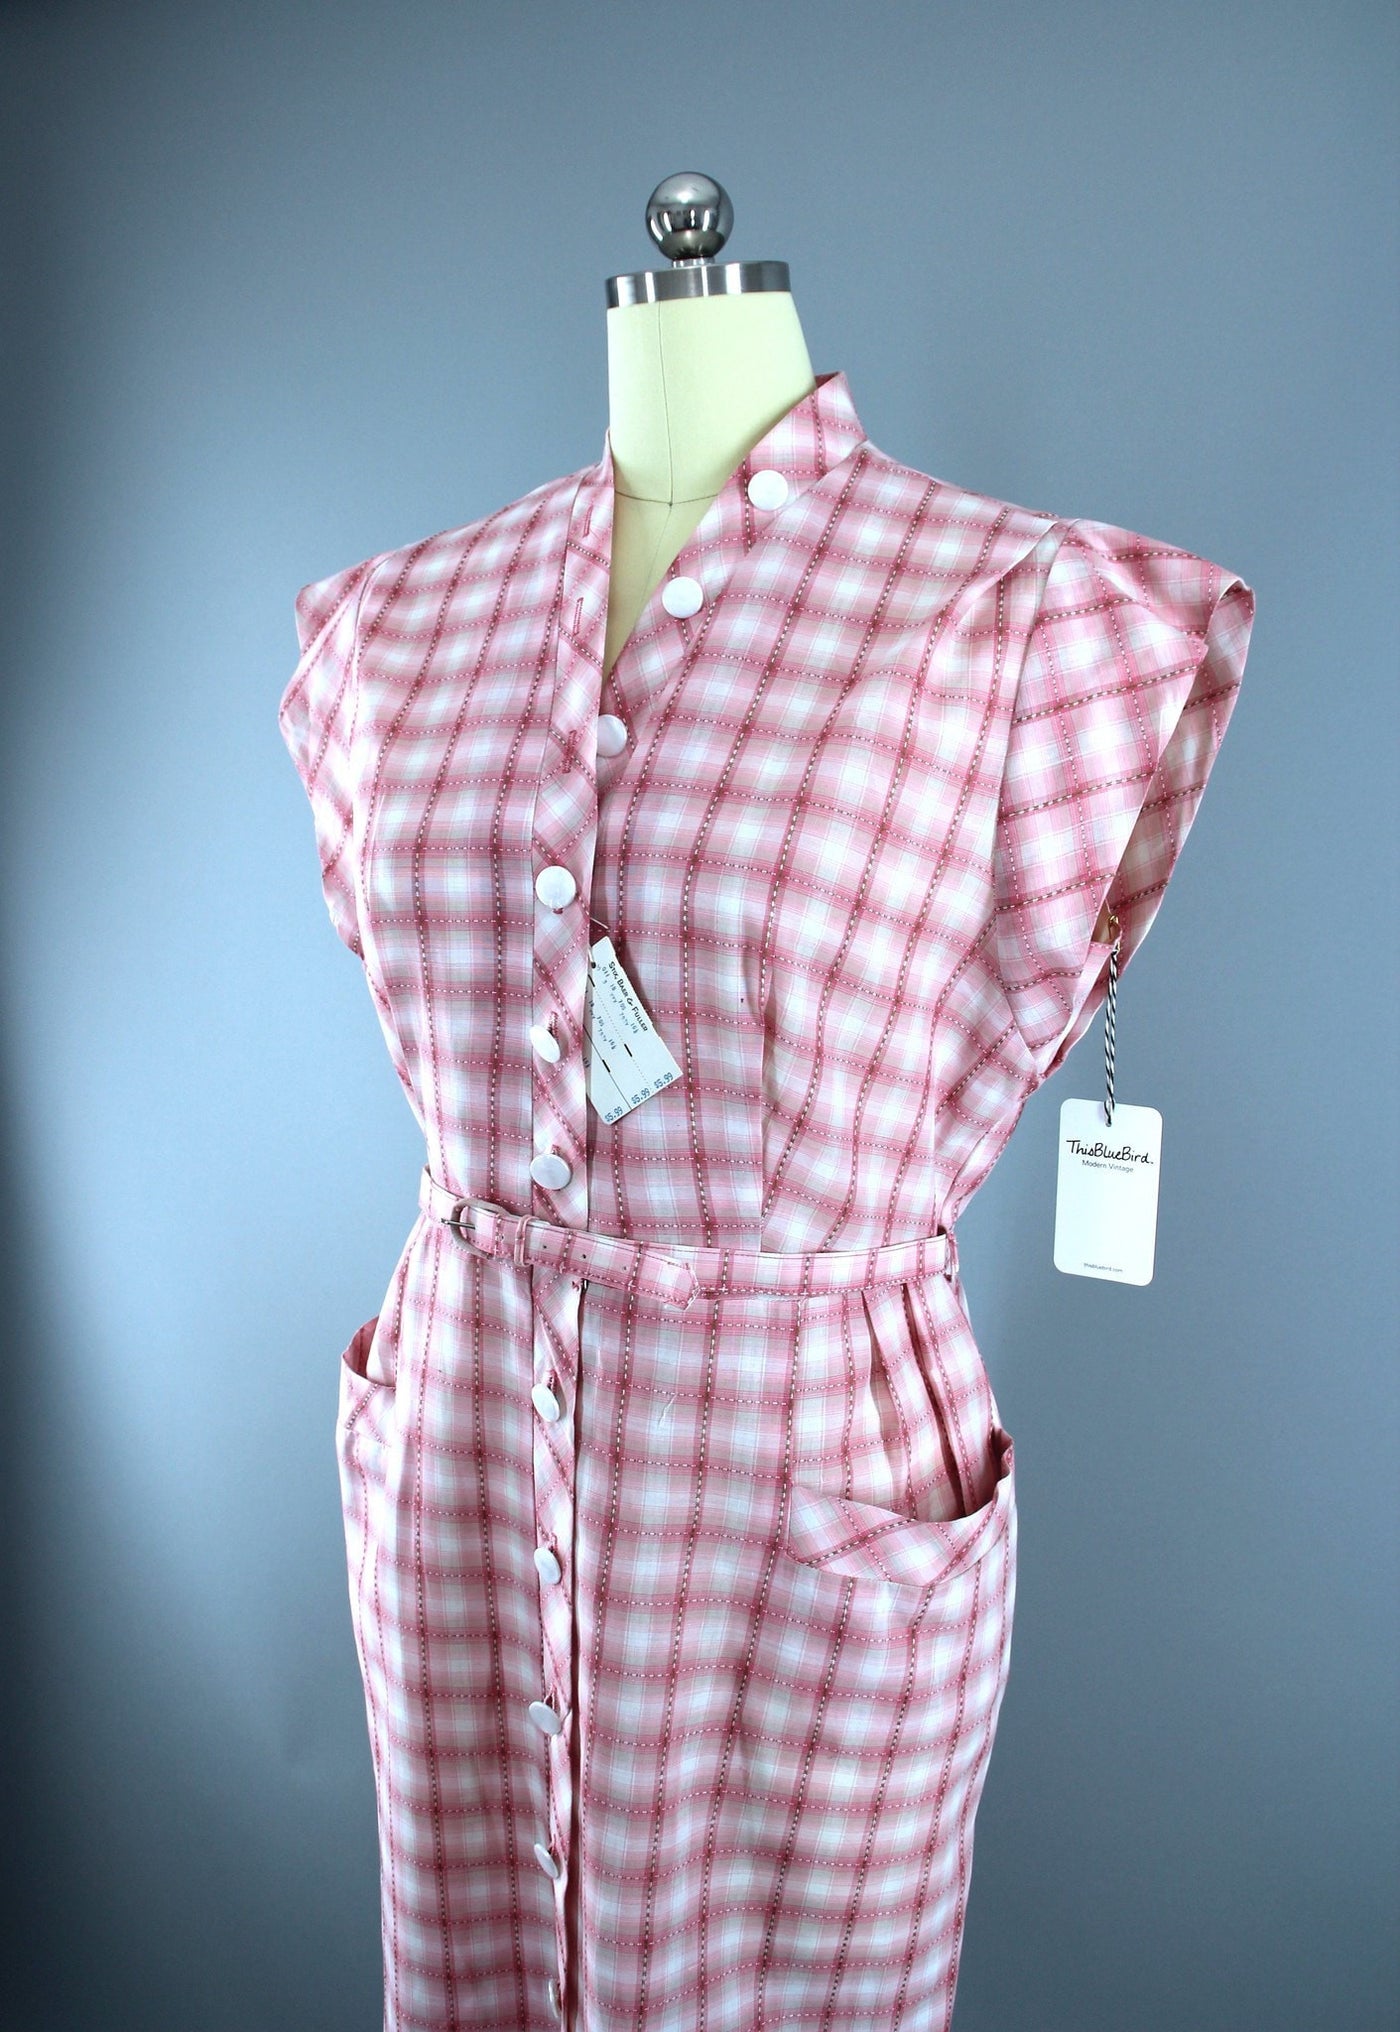 Vintage 1950s New Look Day Dress / Pink & White Checkerboard Plaid Cotton - ThisBlueBird